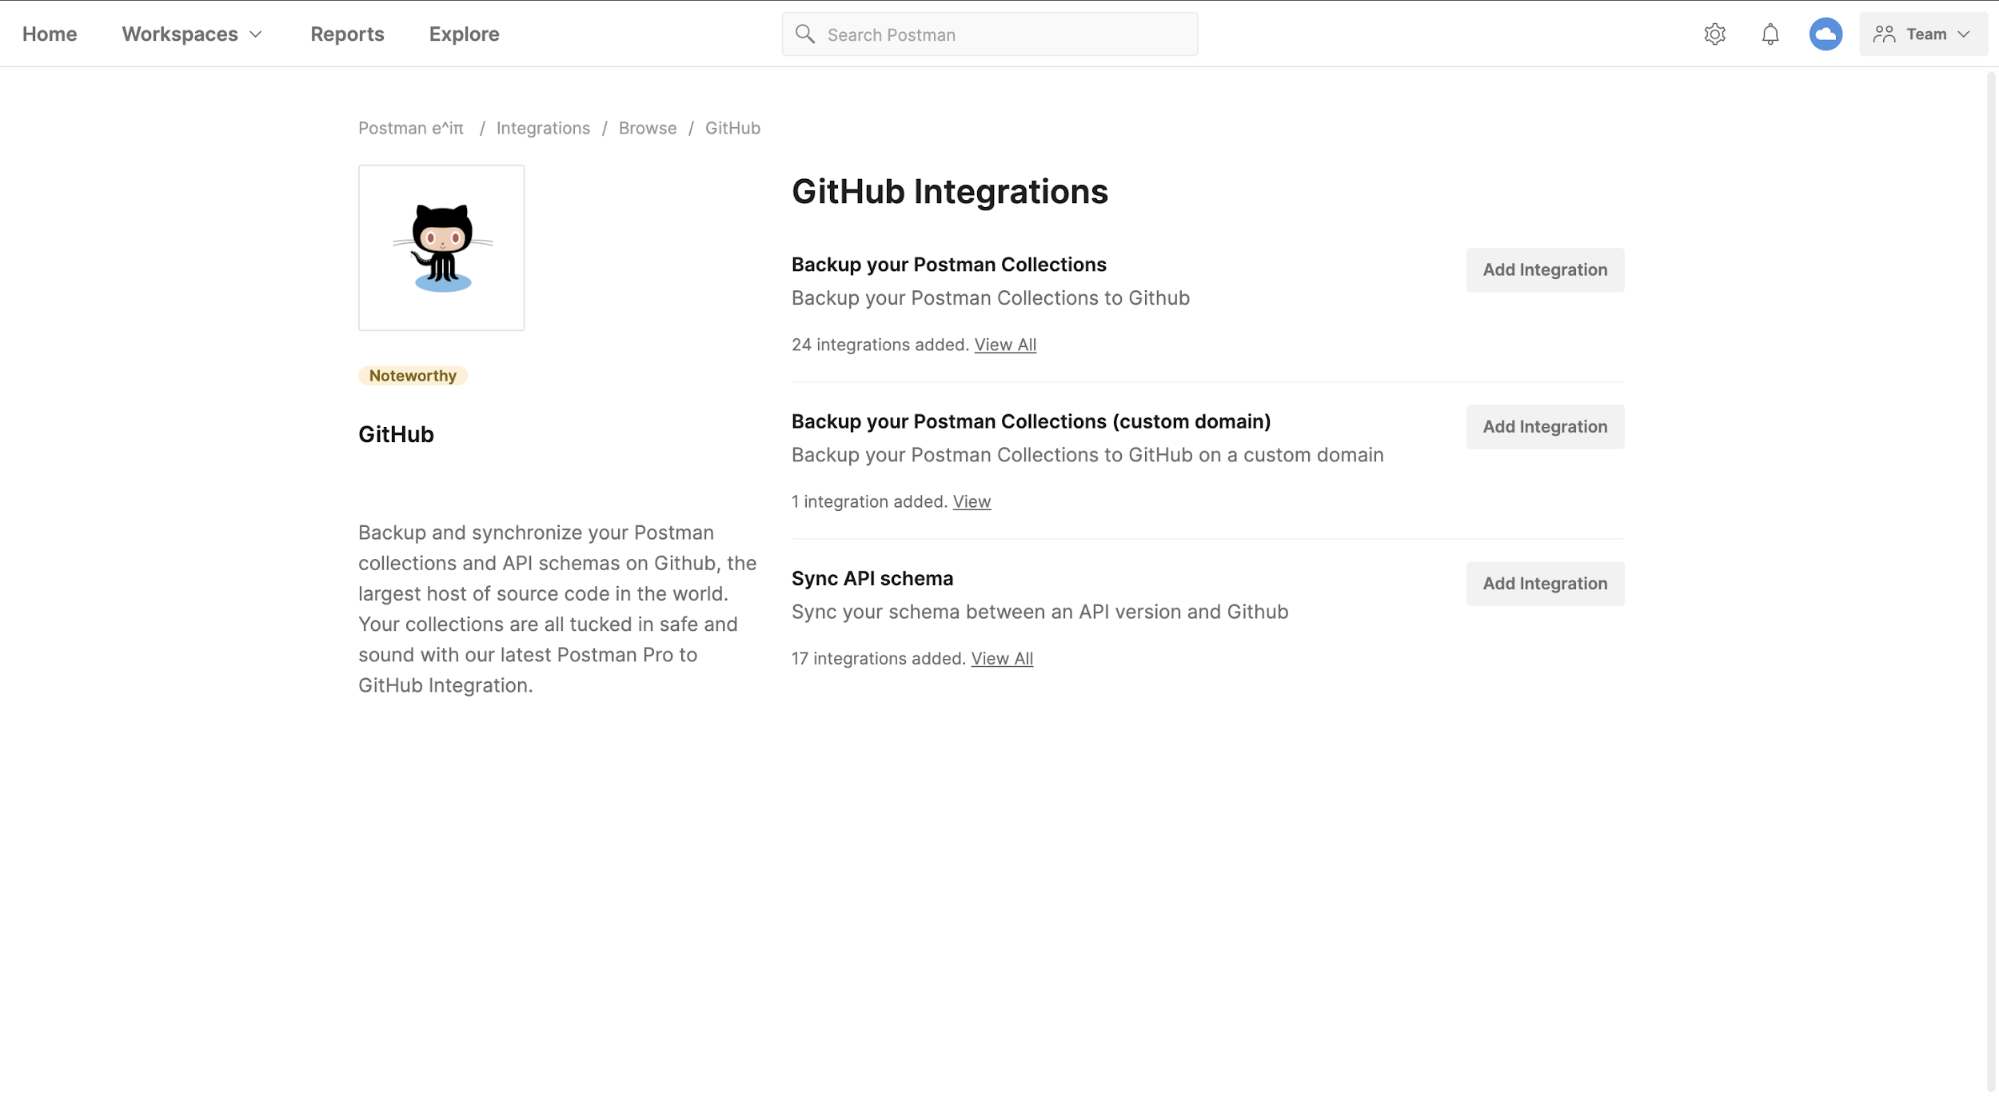 GitHub Integrations details page in Postman